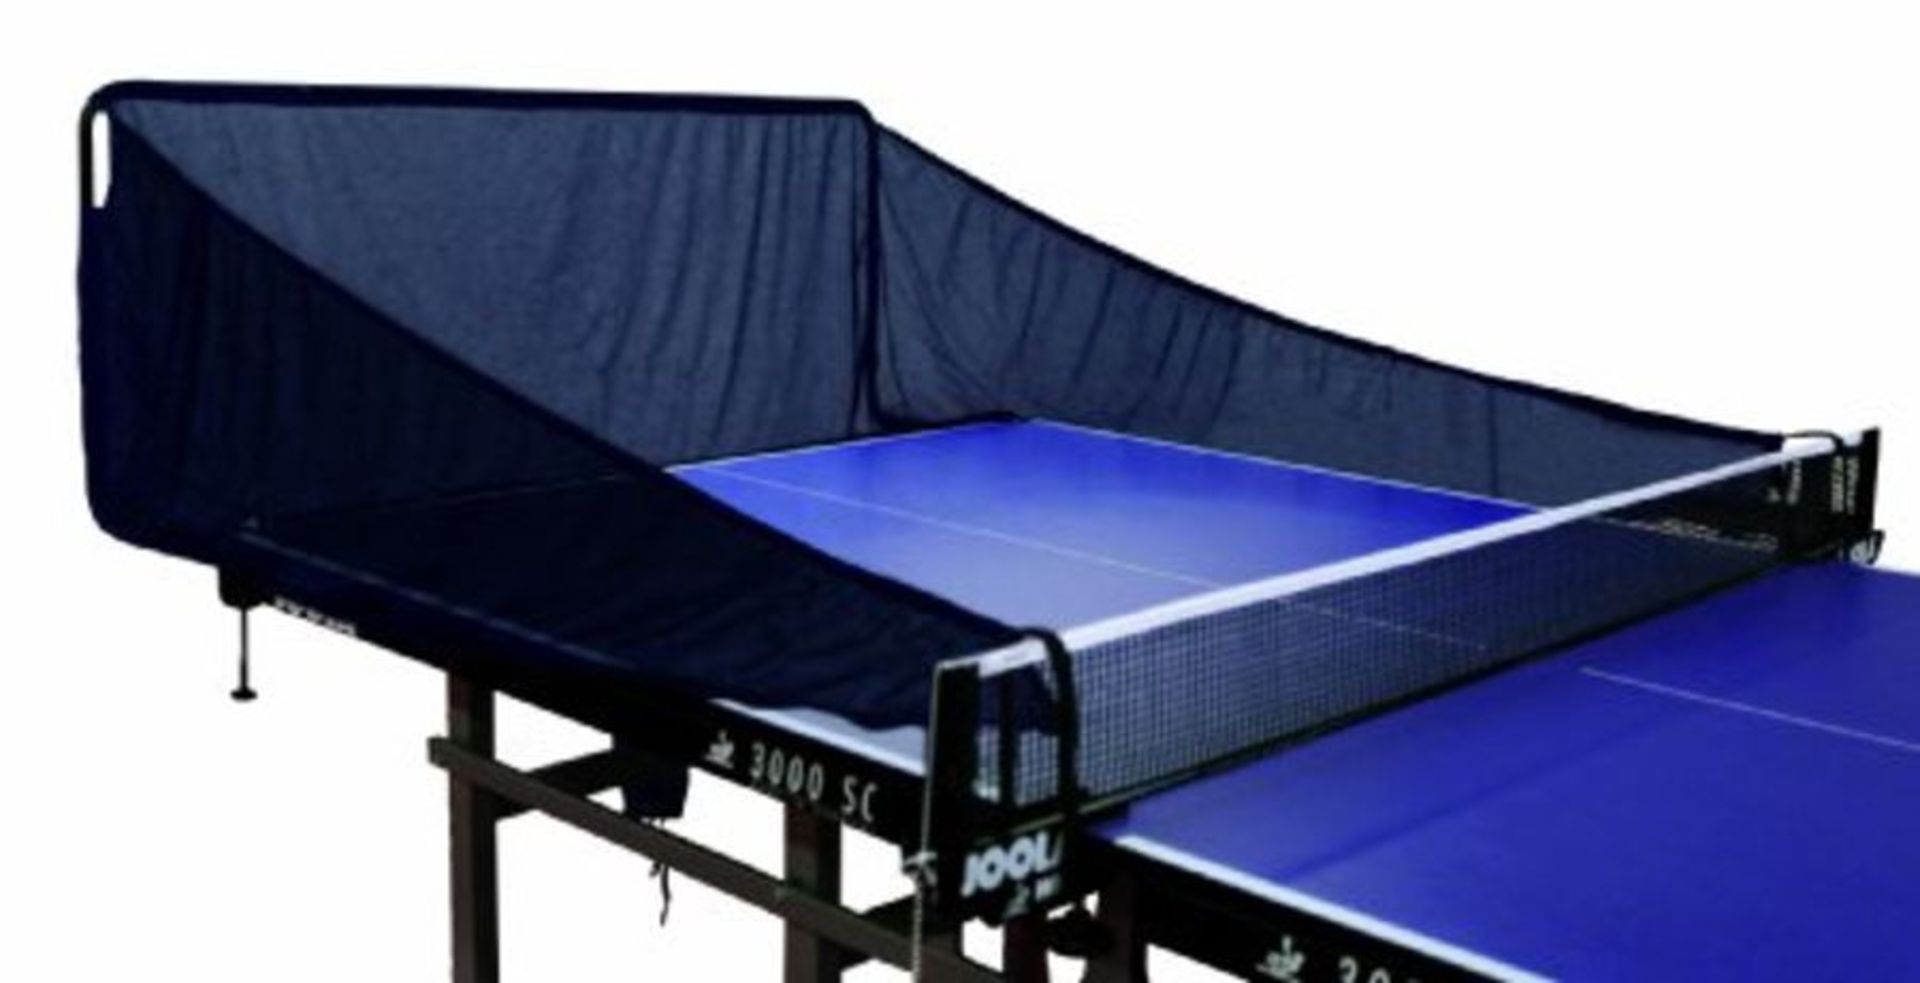 JOOLA BUDDY Carbon Fiber Table Tennis Ball Catch Net Collection During Table Tennis Ro